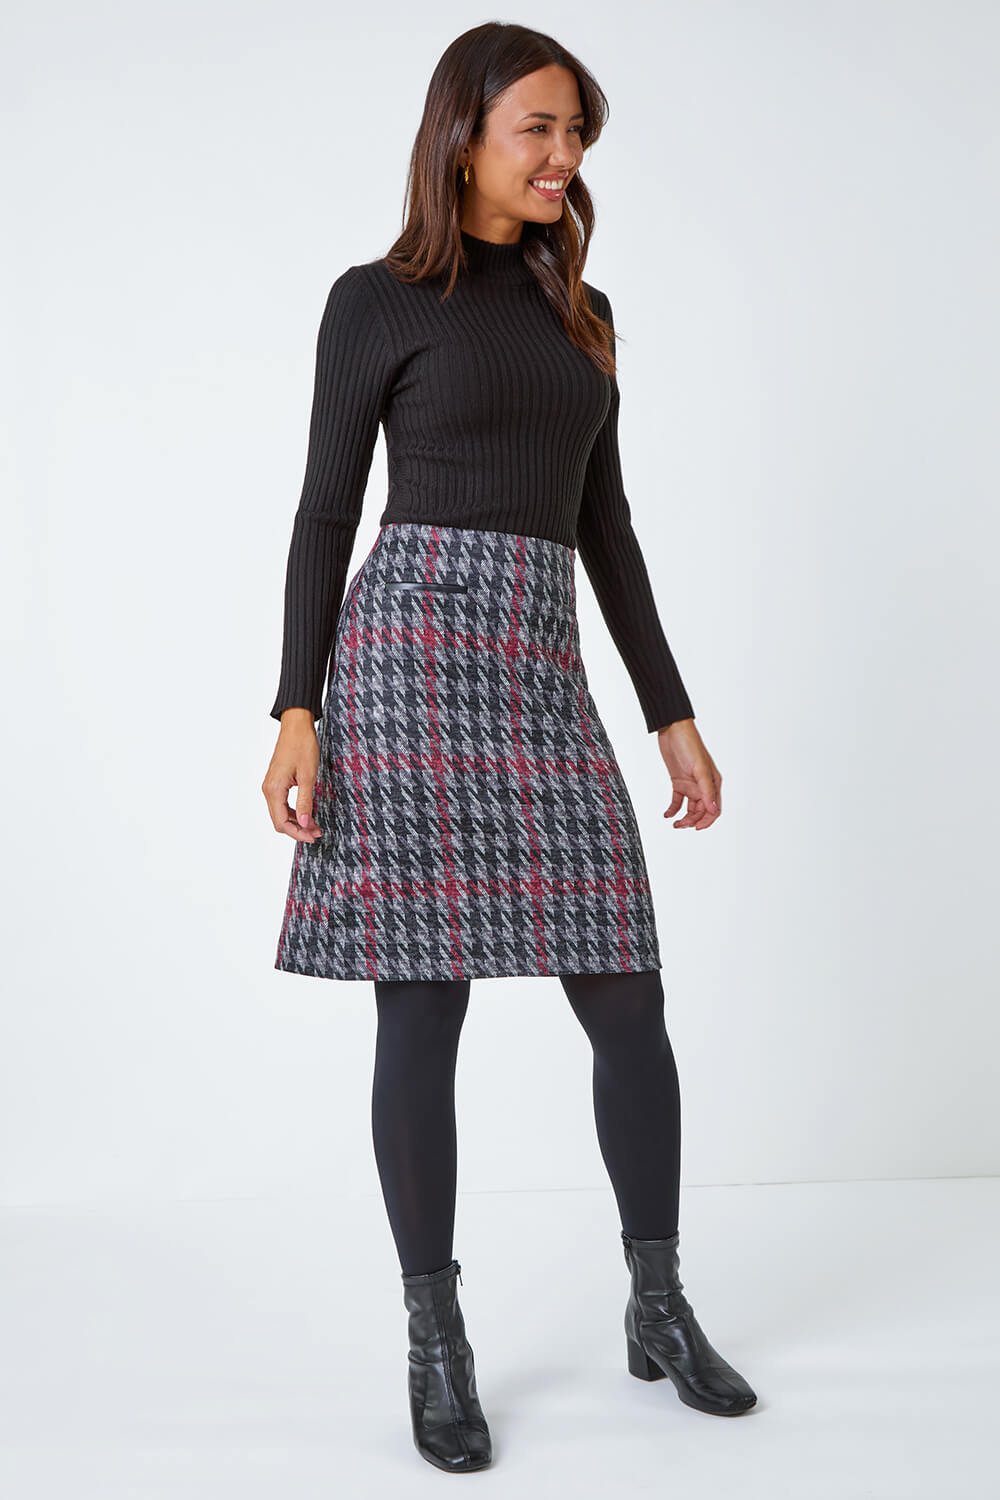 Red Houndstooth Stretch Pencil Skirt, Image 2 of 5